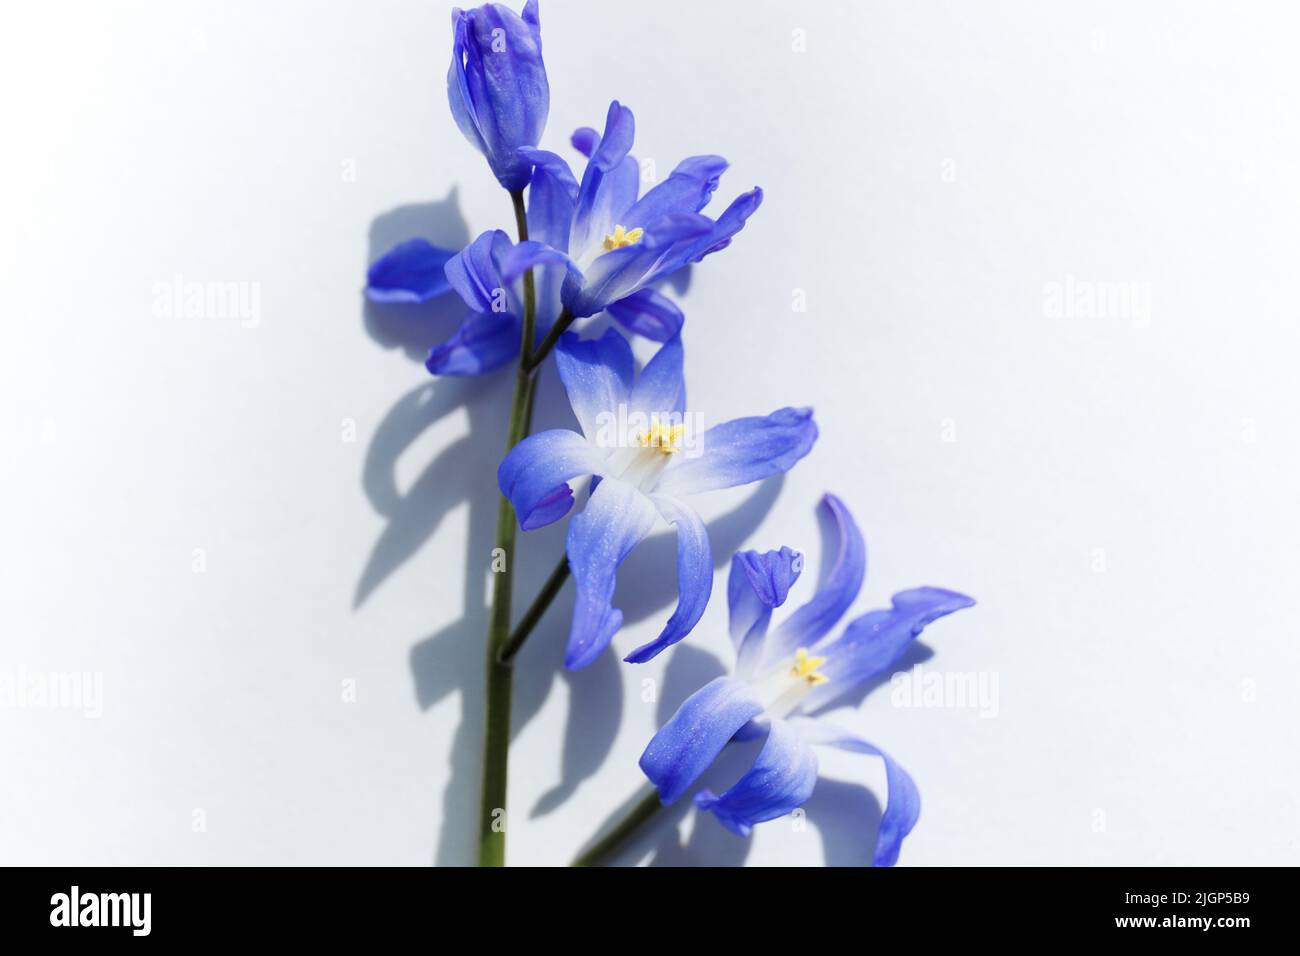 Close up of Glory-of-the-snow flowers (Chionodoxa luciliae). Blue spring flowers in bloom in the form of colorful stars. First spring bulbous plants. Stock Photo